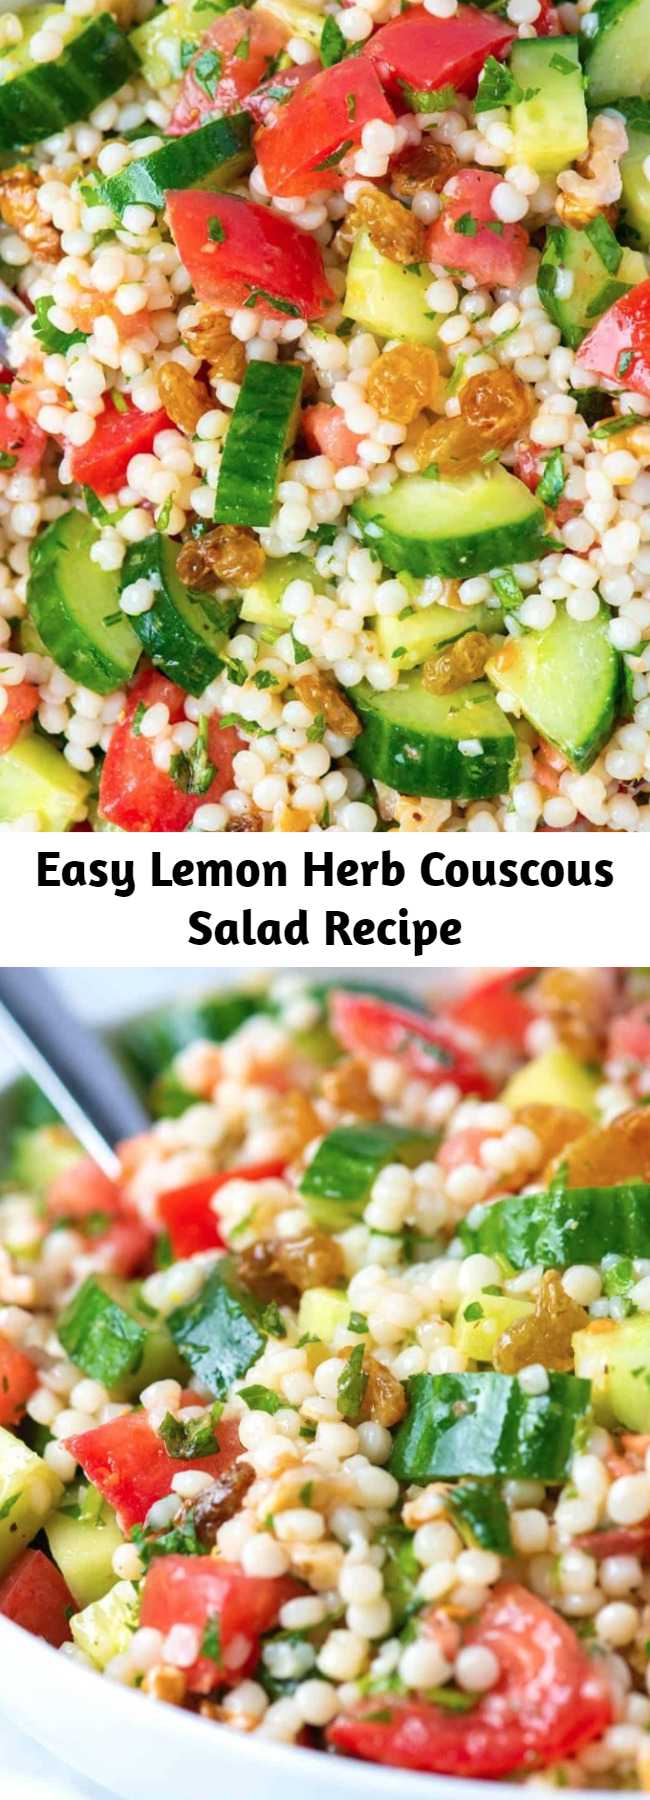 Easy Lemon Herb Couscous Salad Recipe - We love this light couscous salad — it doubles as a side, can be the main event or works well topped with grilled chicken or Adam’s favorite, shrimp! With lots of texture from crisp cucumber, sweet tomatoes, crunchy nuts and raisins, this is certainly one of our favorites. You can even make it ahead of time.